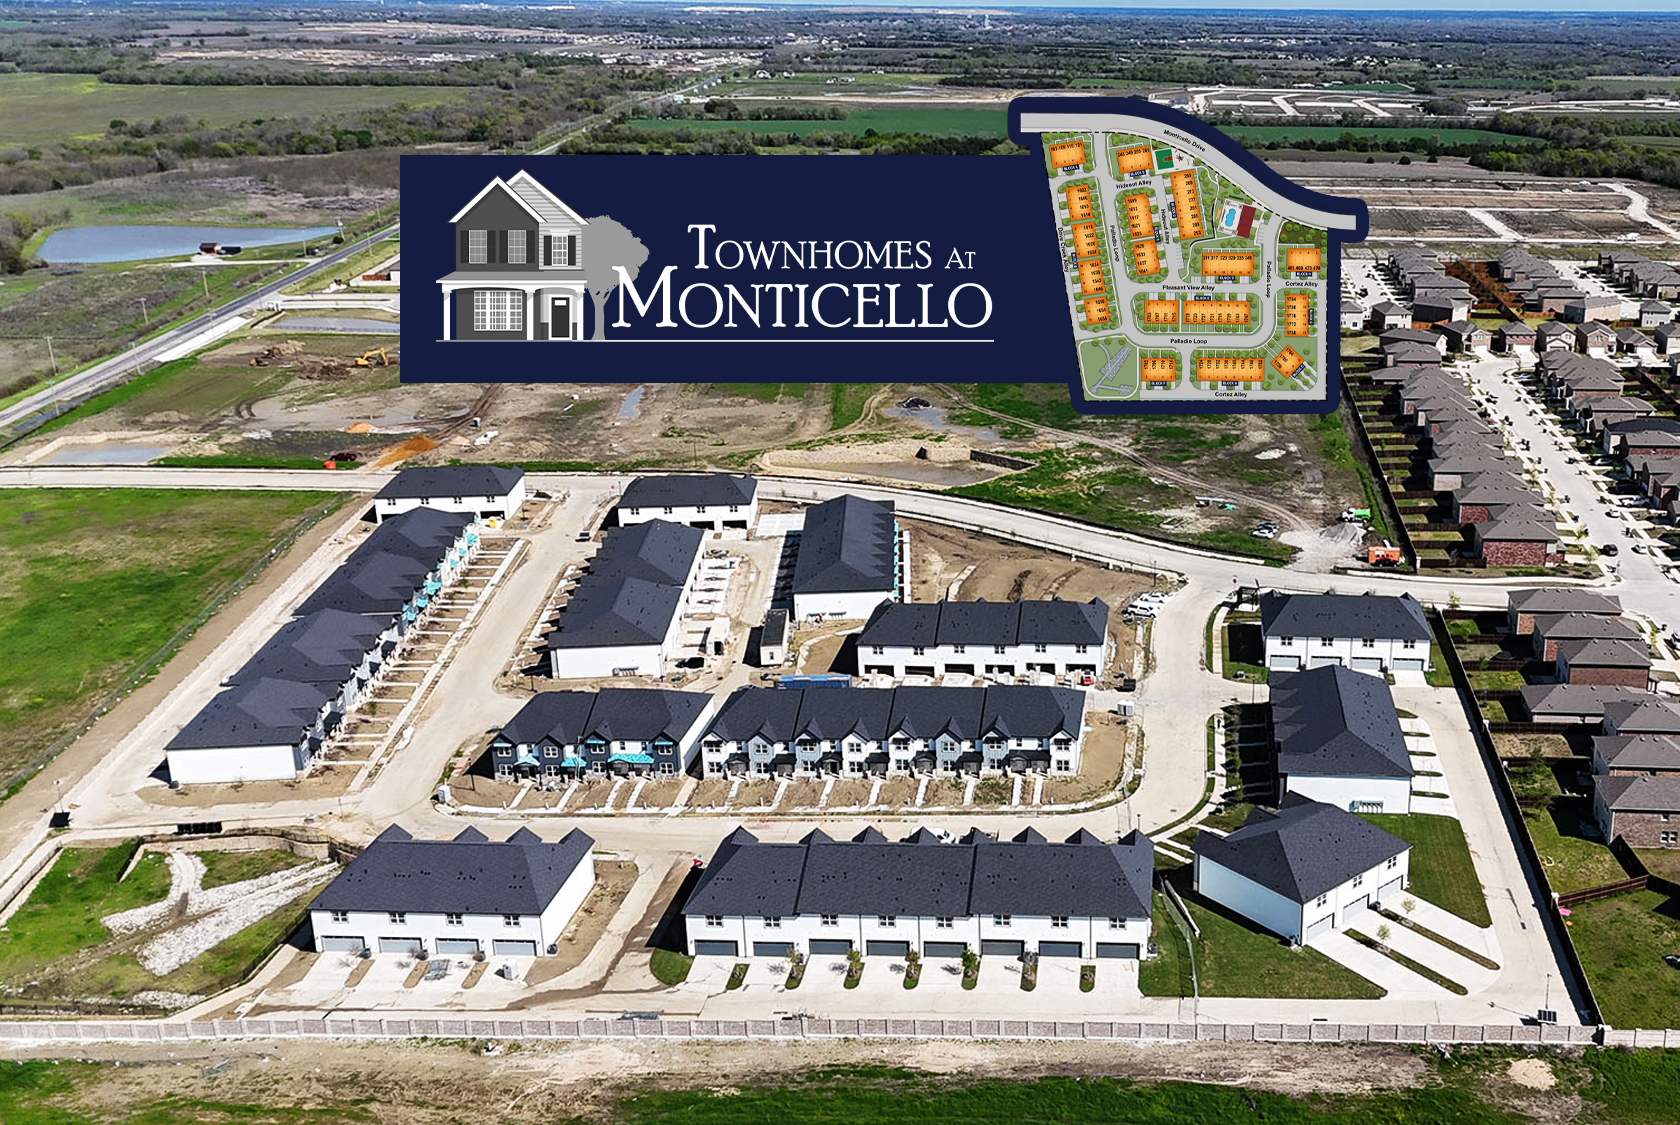 Townhomes at Monticello